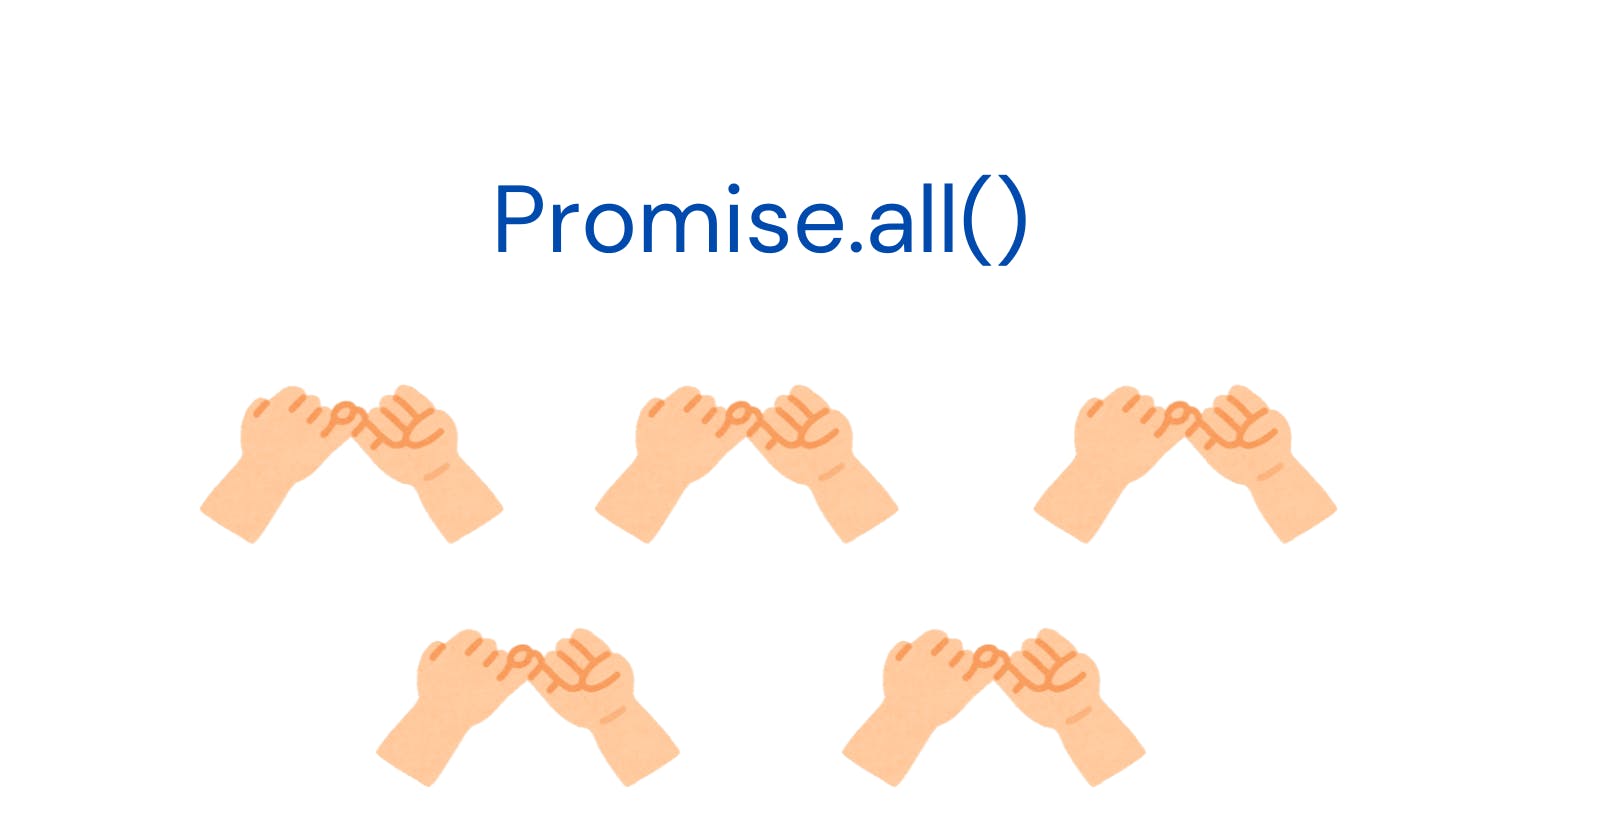 Implement Polyfill for promise.all